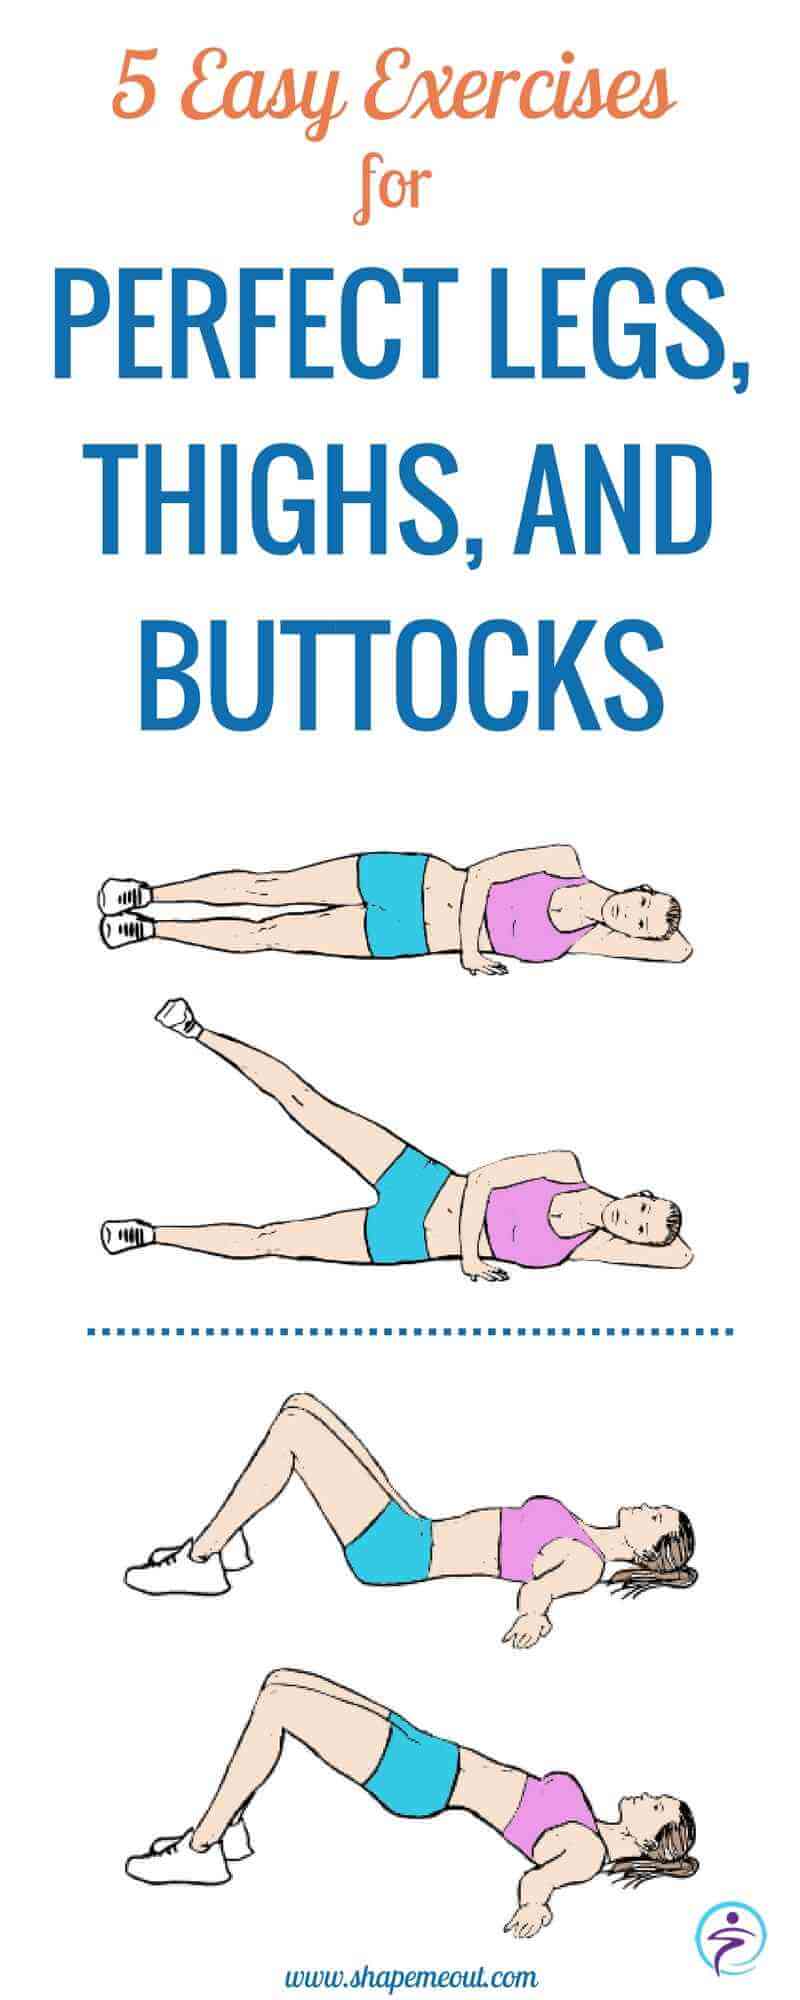 Easy Exercise for a Perfect Leg, Thigh And Buttock